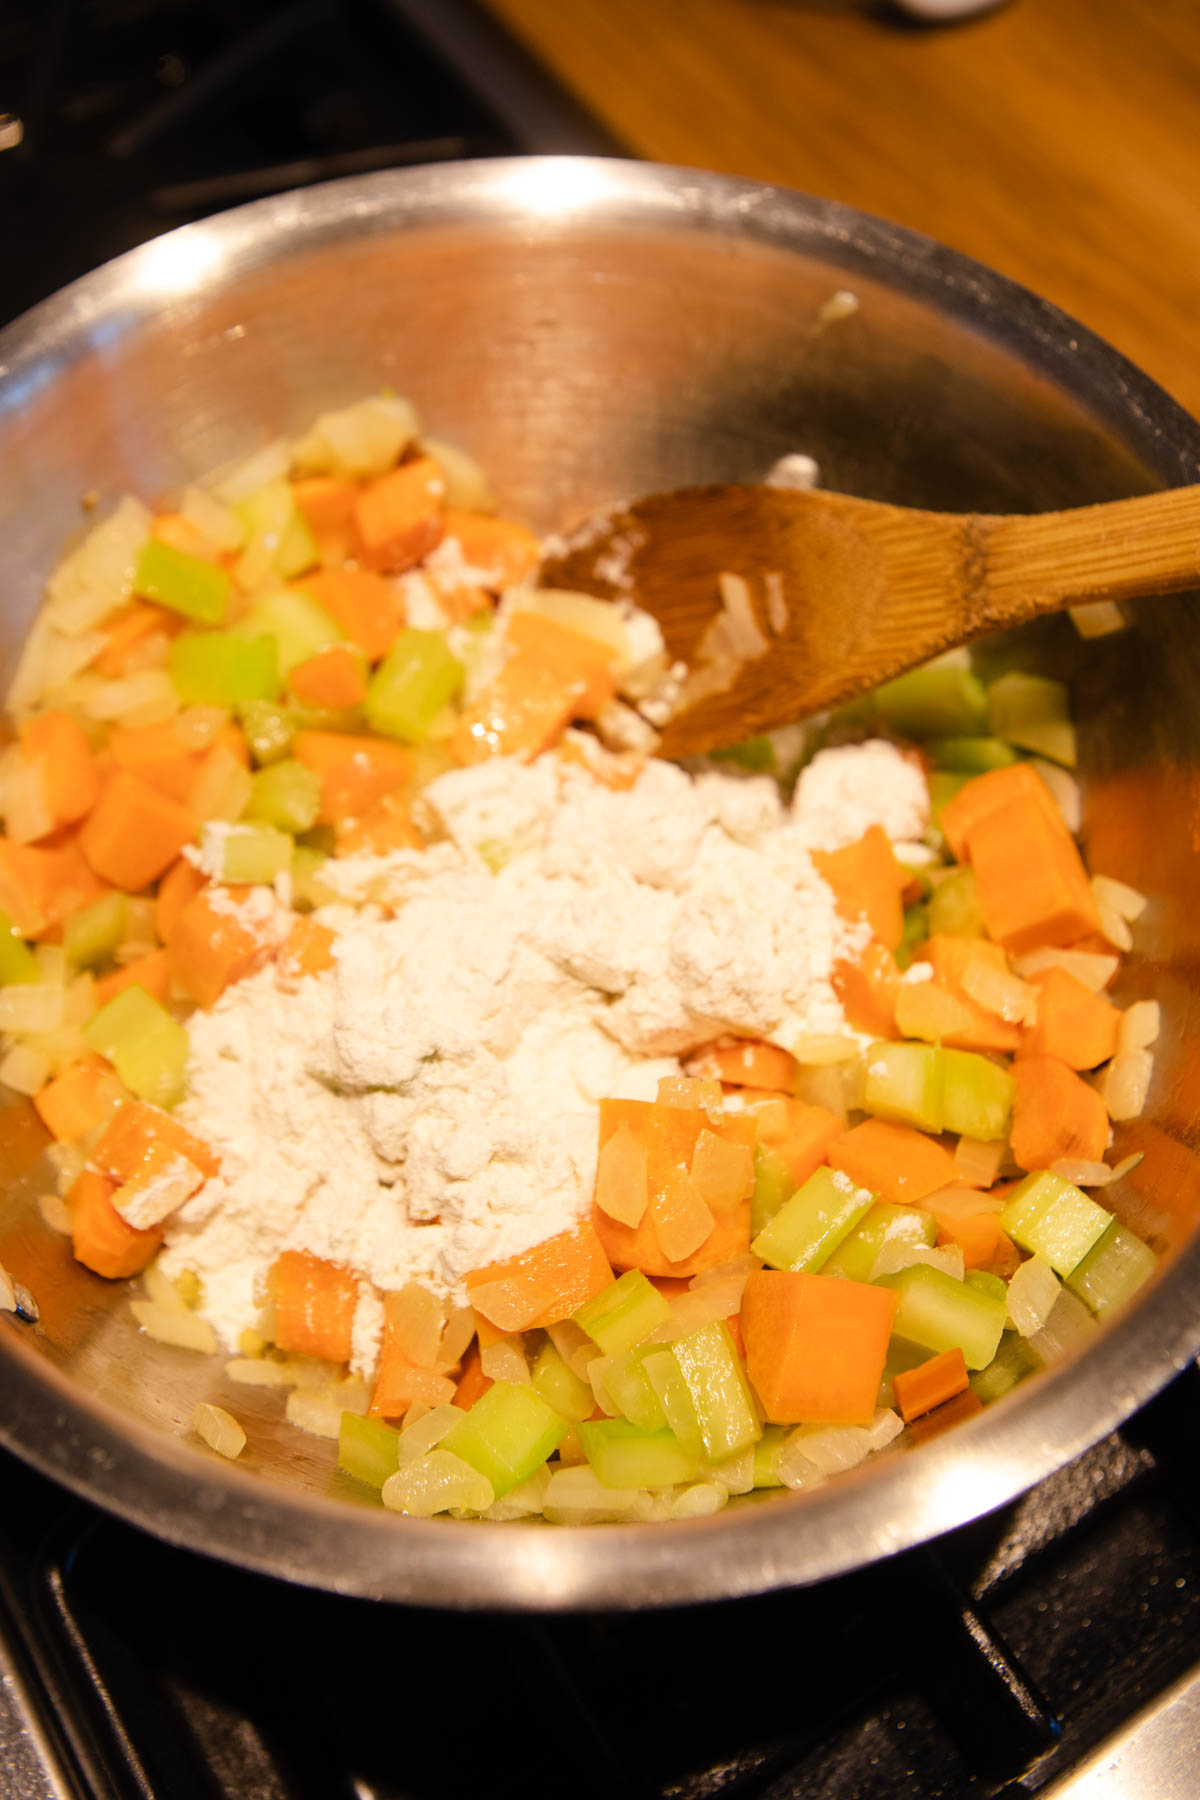 flour added to a sauce pan filled with carrots, celery and onions